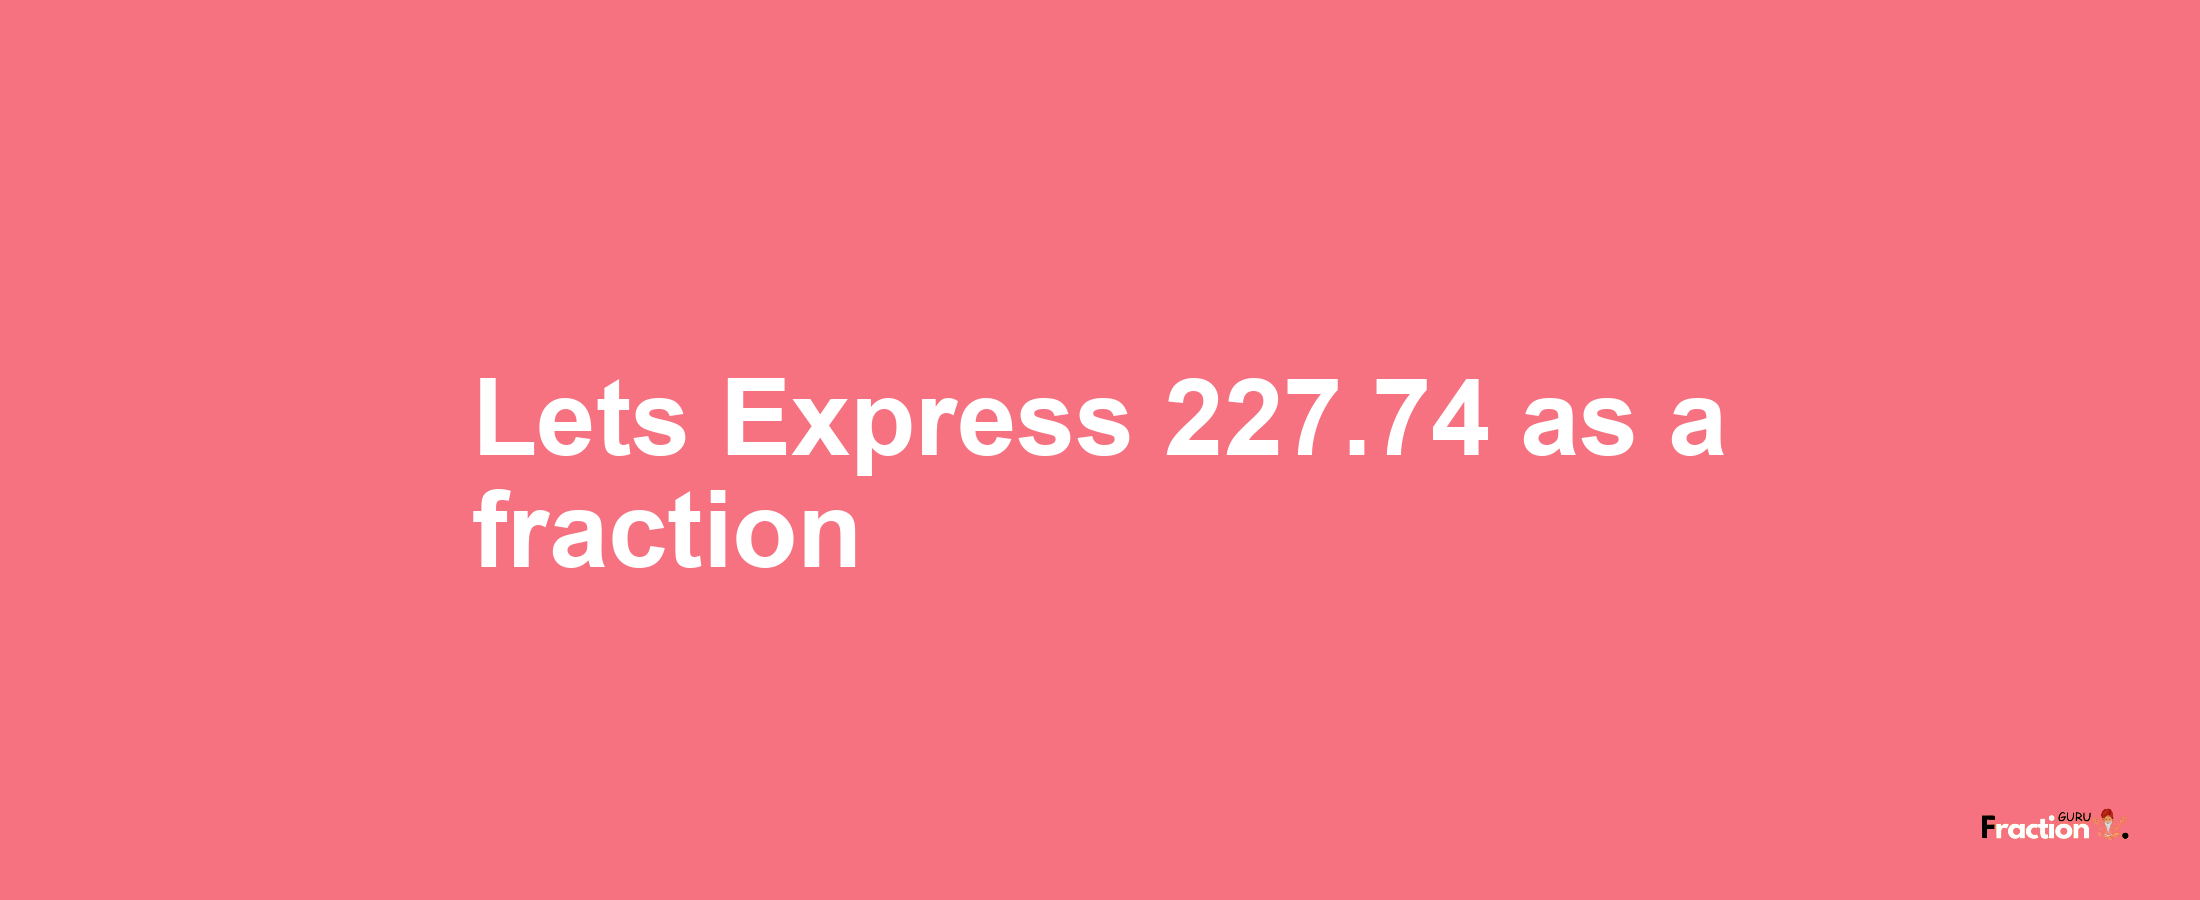 Lets Express 227.74 as afraction